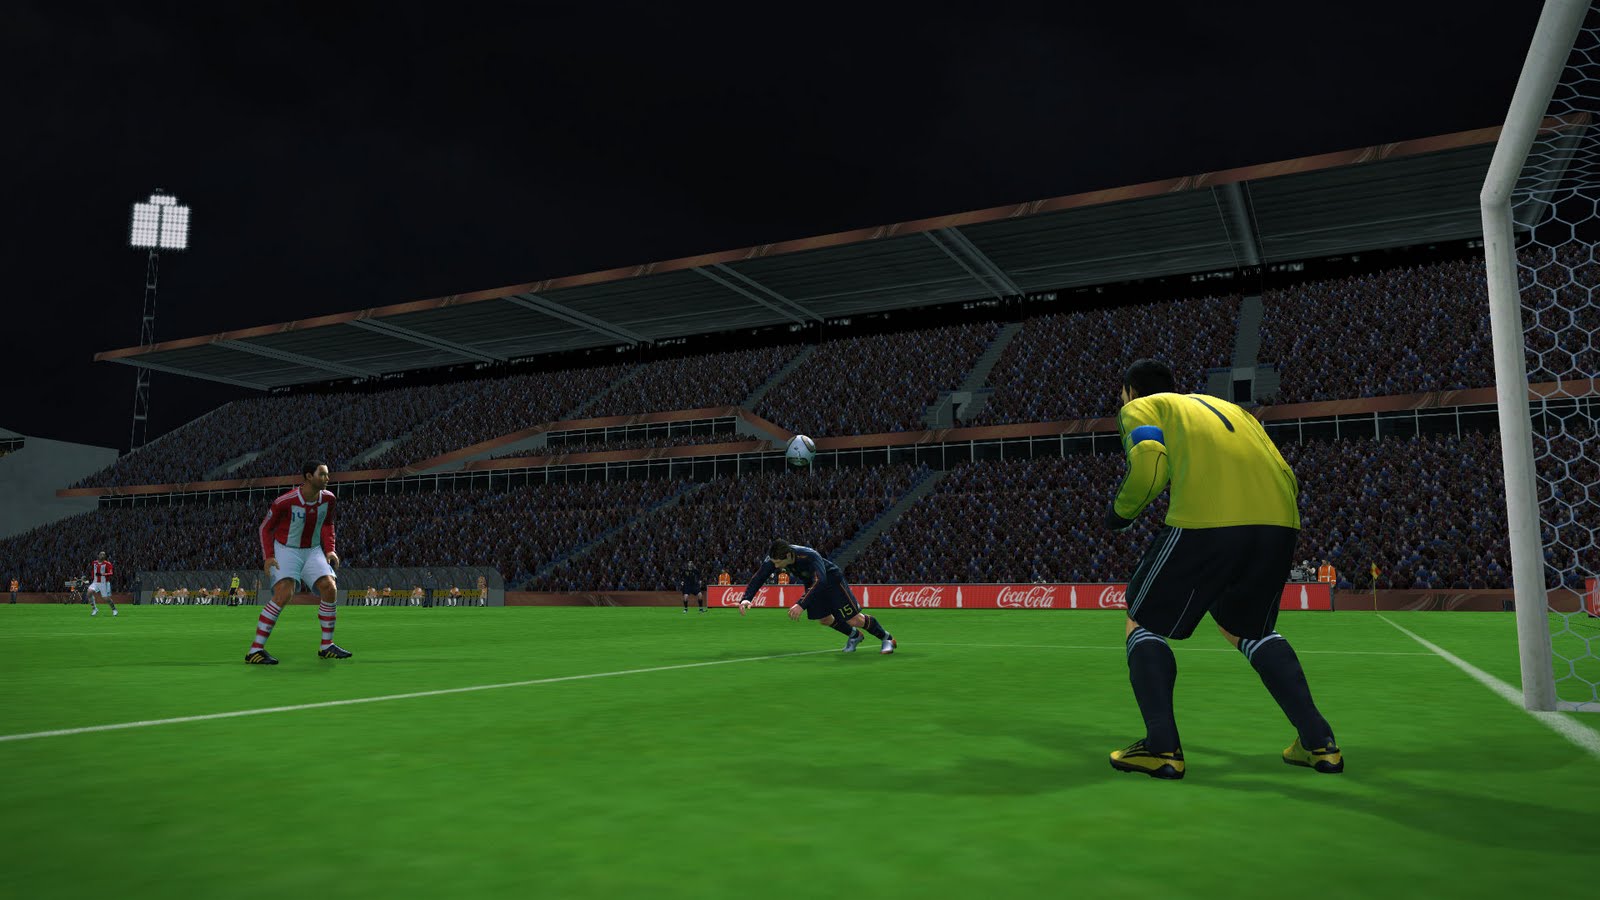 PESEdit.com 2010 FIFA World Cup Patch 1.2 - RELEASED! - PESEdit Blog